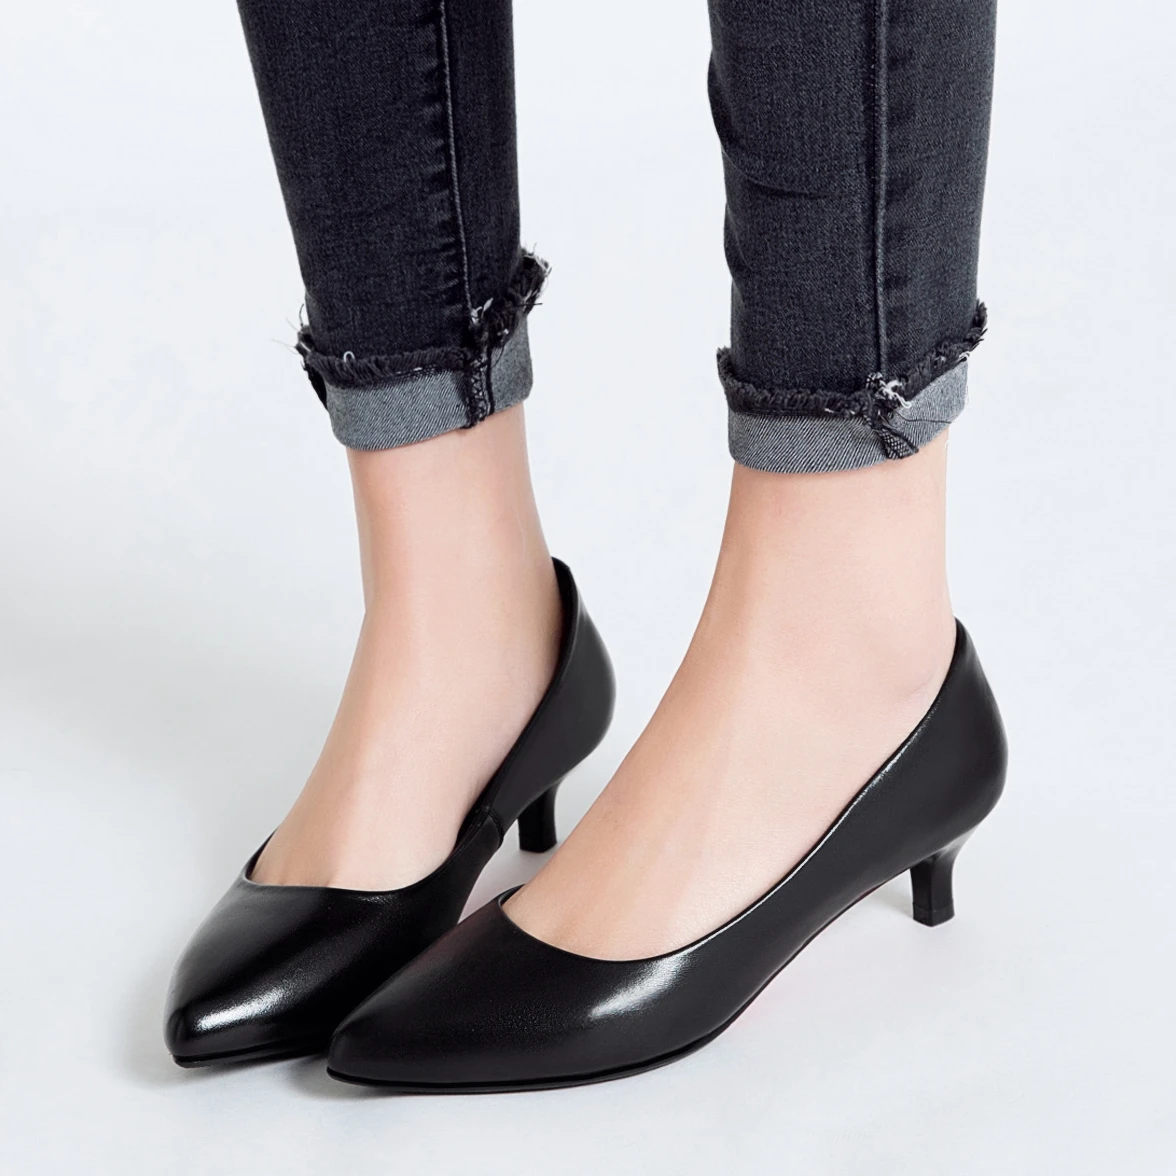 Black Leather Stiletto Boots With Pointed Toe And High Heels For Women And  Kids Casual Office Black Heels Fashion Nova In Large Size 44x12cm From  Happyday818, $64.02 | DHgate.Com